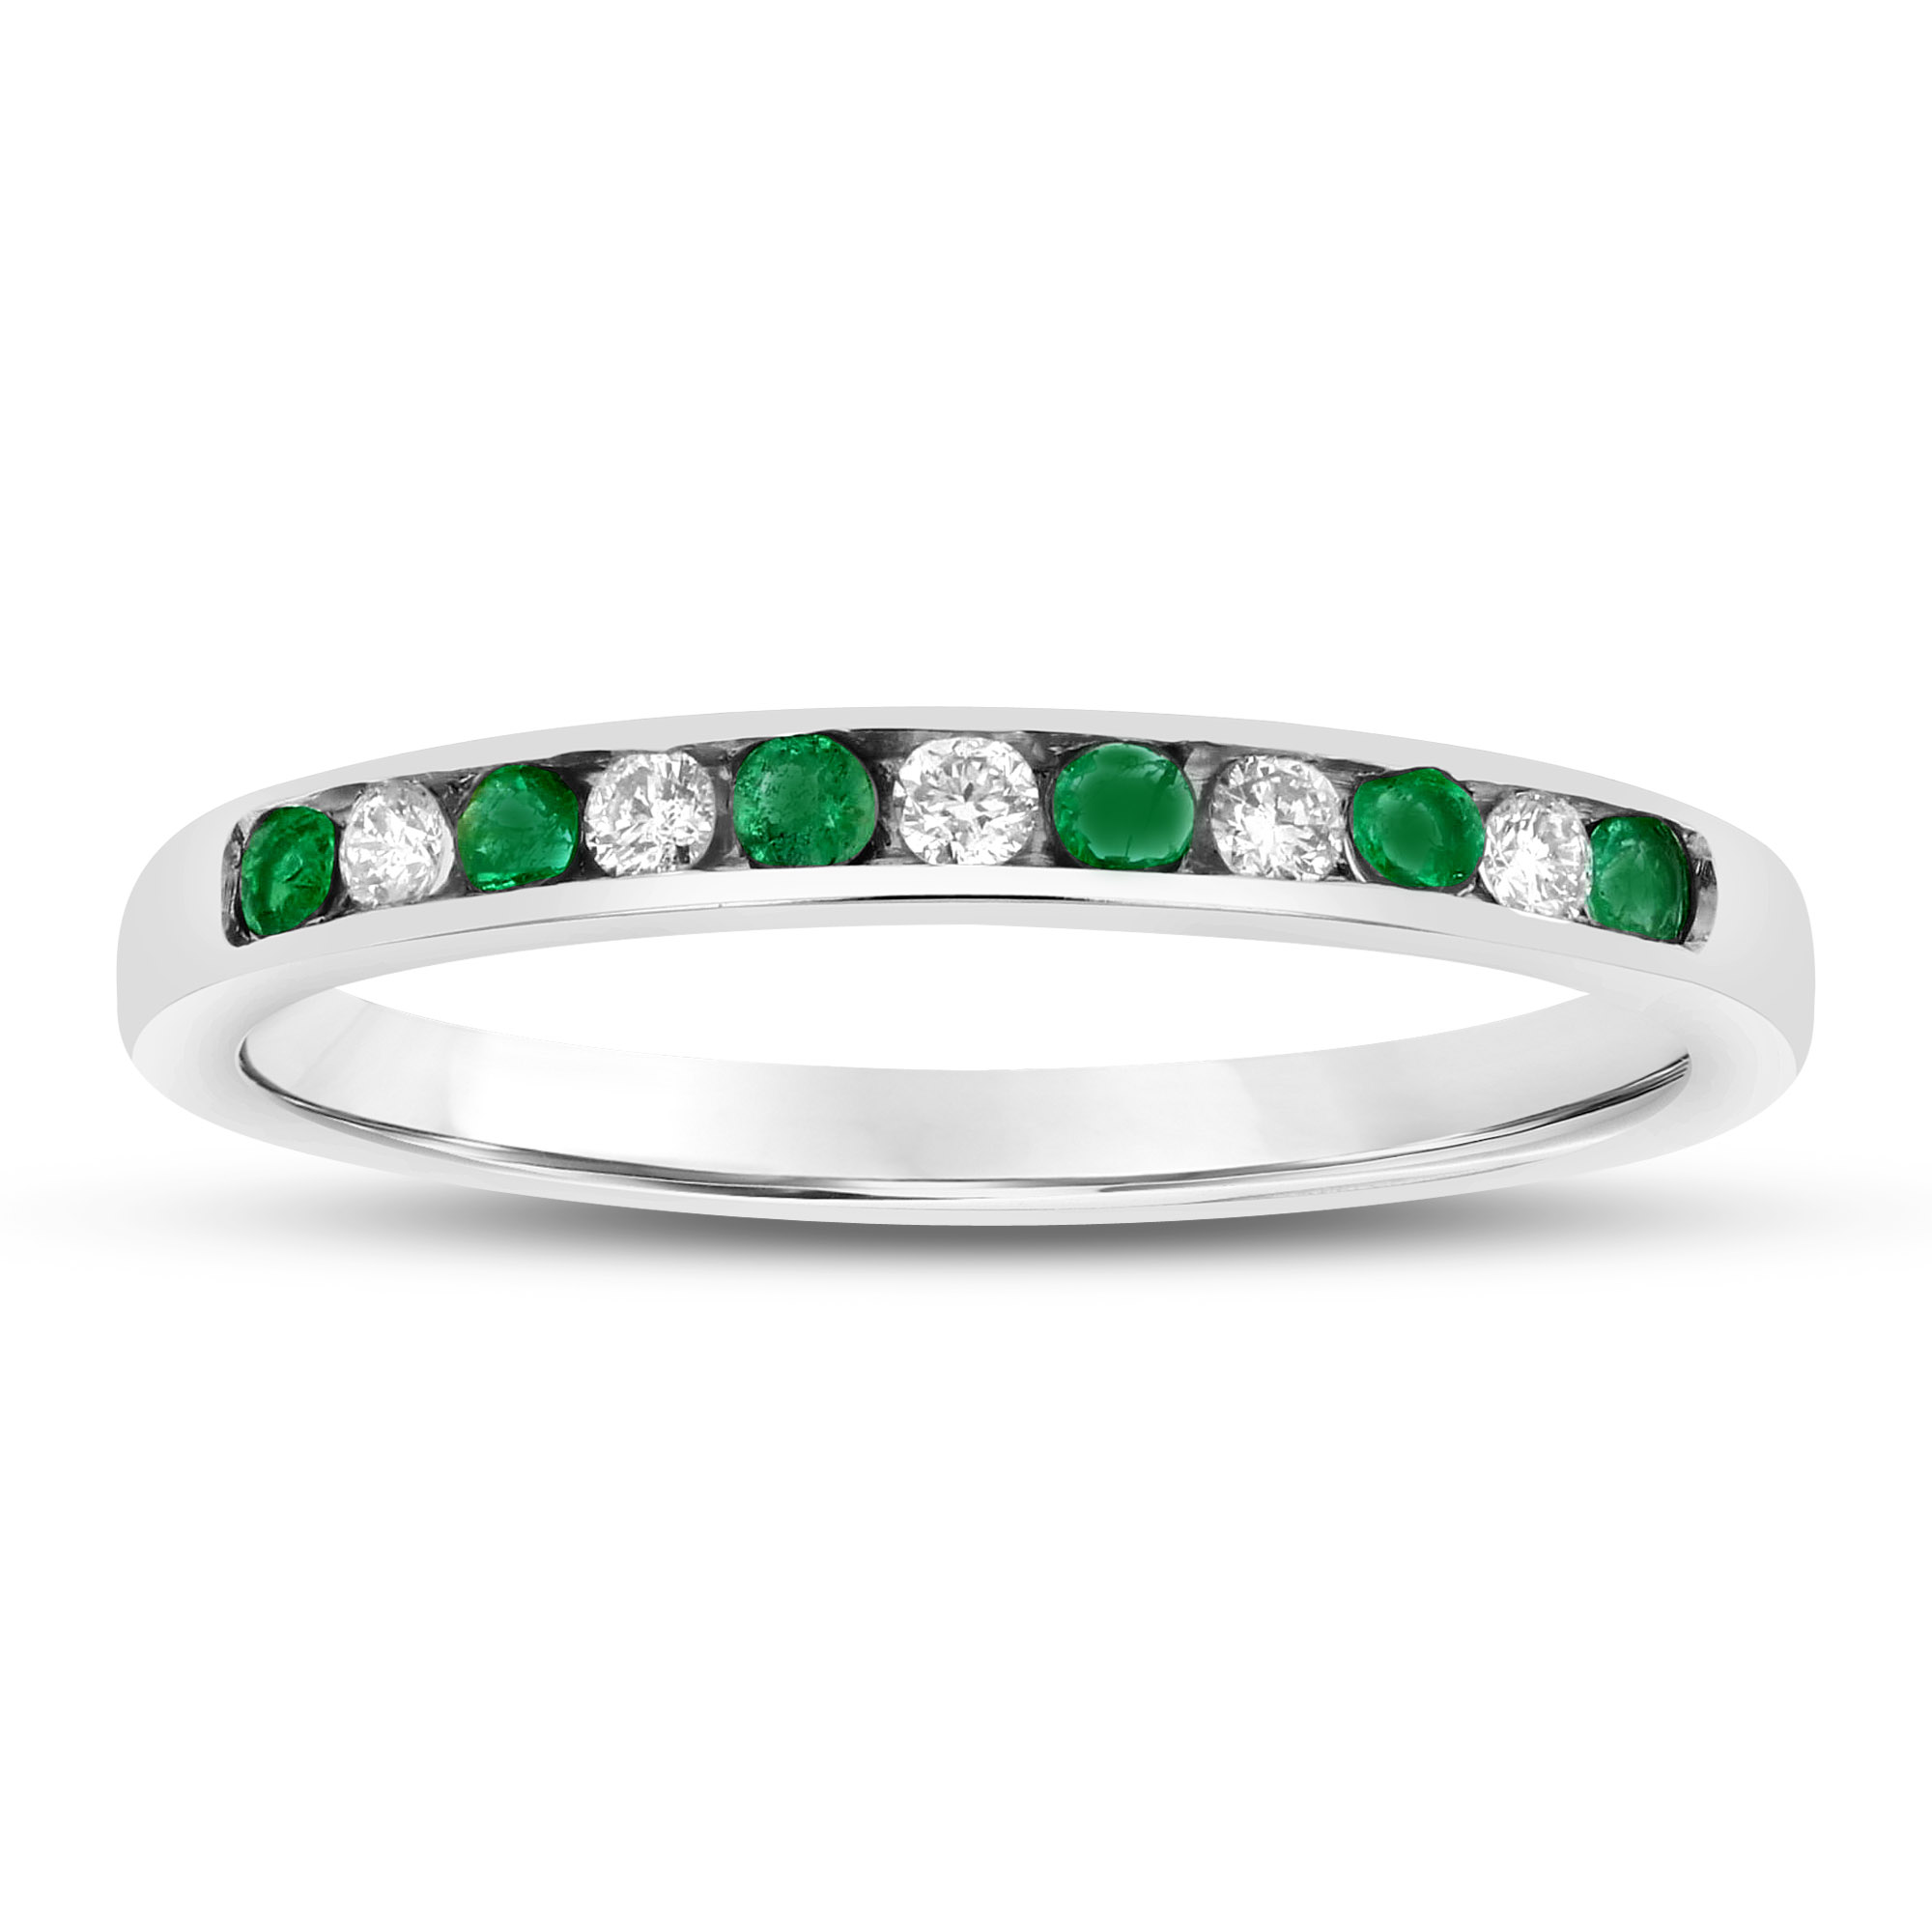 View 0.23ctw Diamond and Emerald Band in 14k Gold